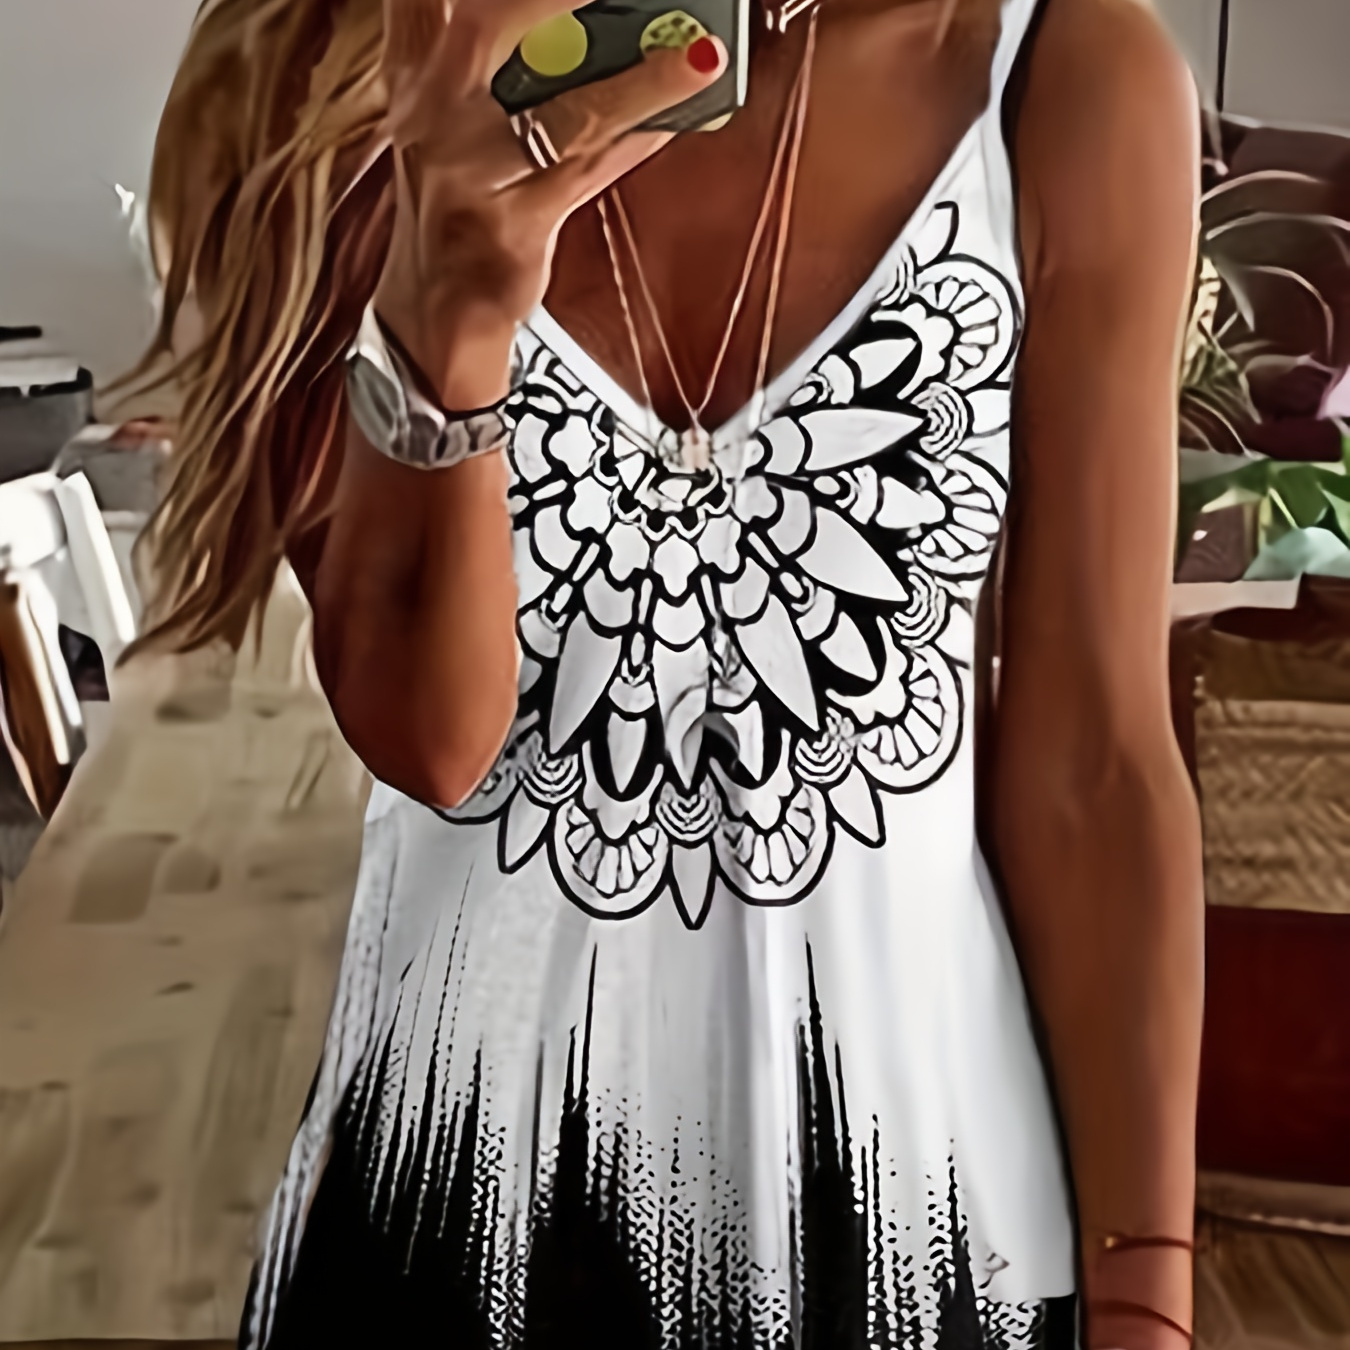 

Floral Print Spaghetti Strap Top, Casual V-neck Sleeveless Cami Top For Summer, Women's Clothing